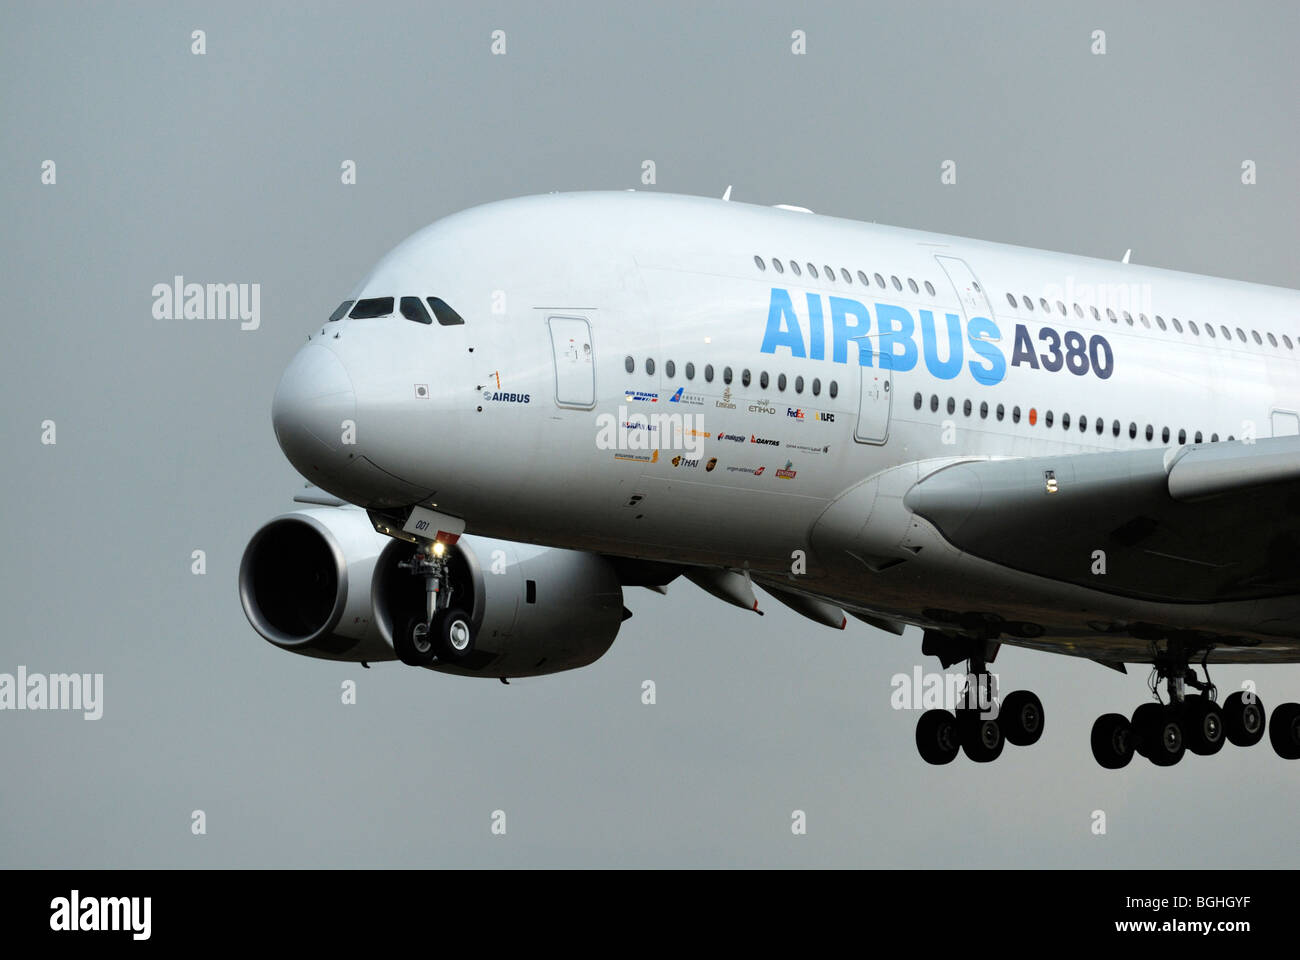 Airbus A380 in flight with landing gear down Stock Photo